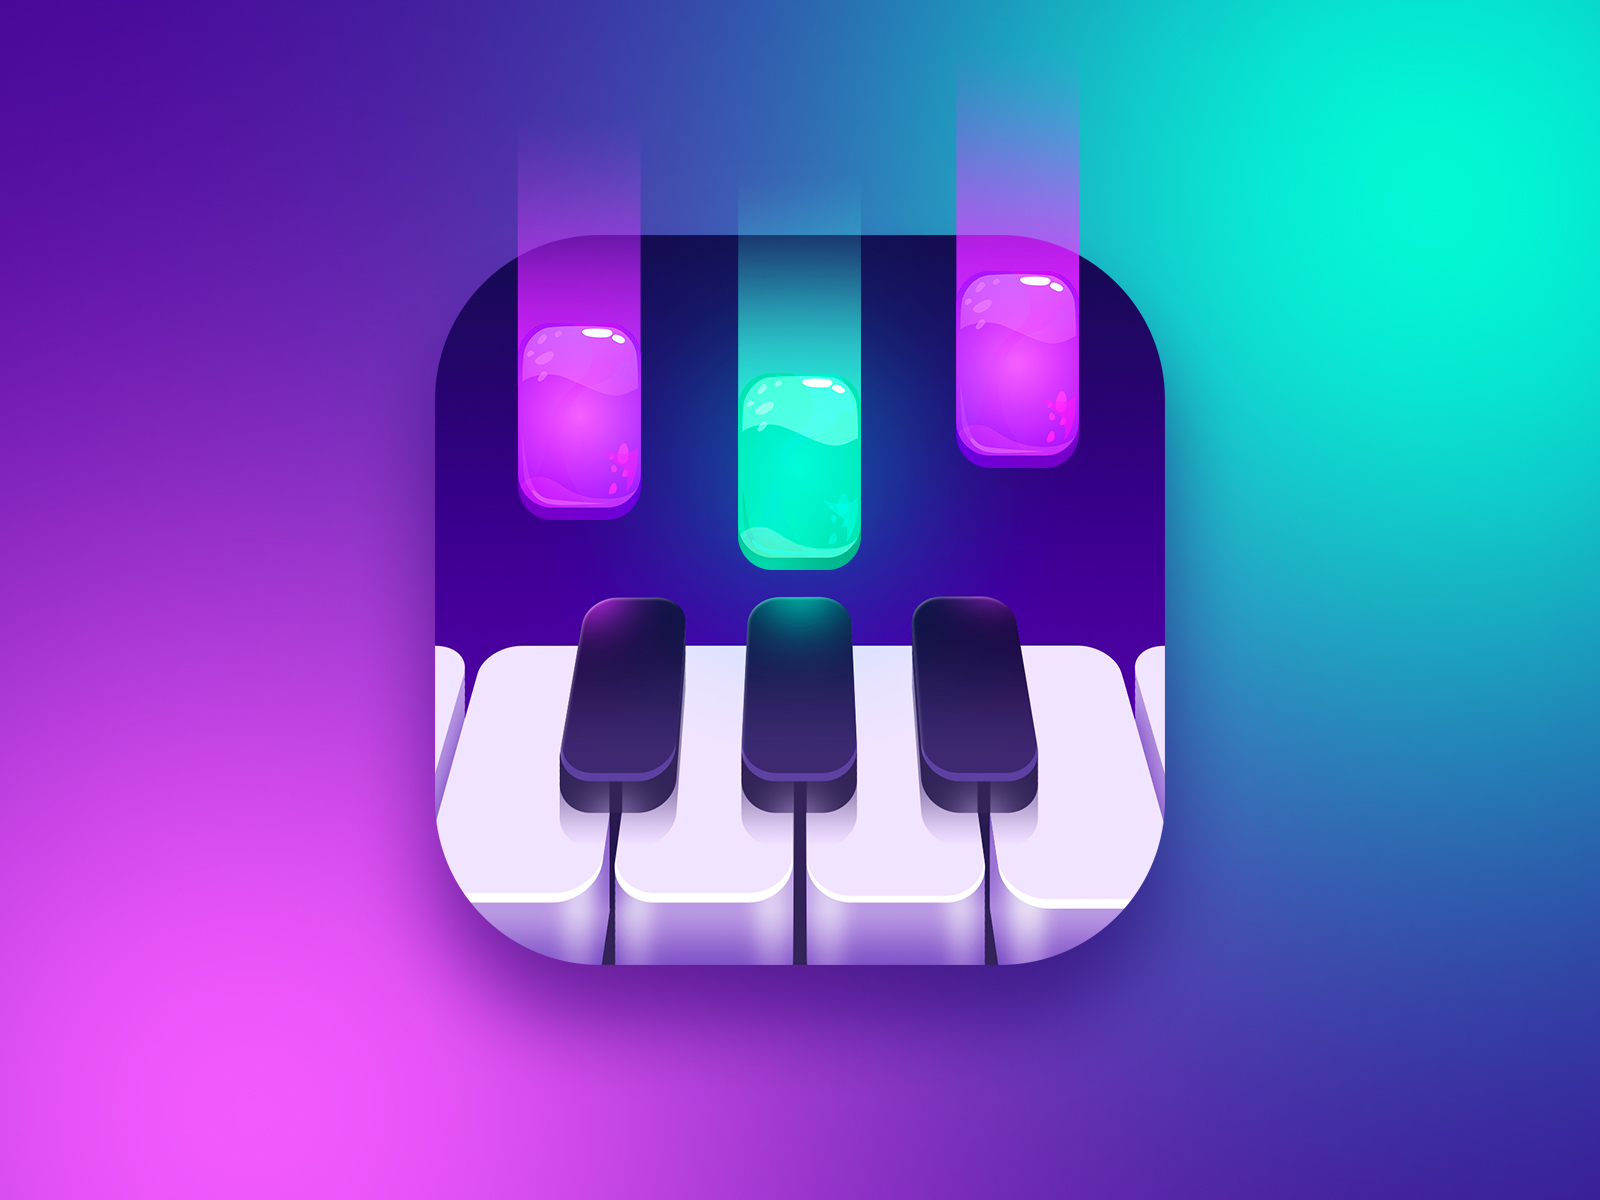 Piano game icon by Vyachaslav Korziuk for Gismart on Dribbble